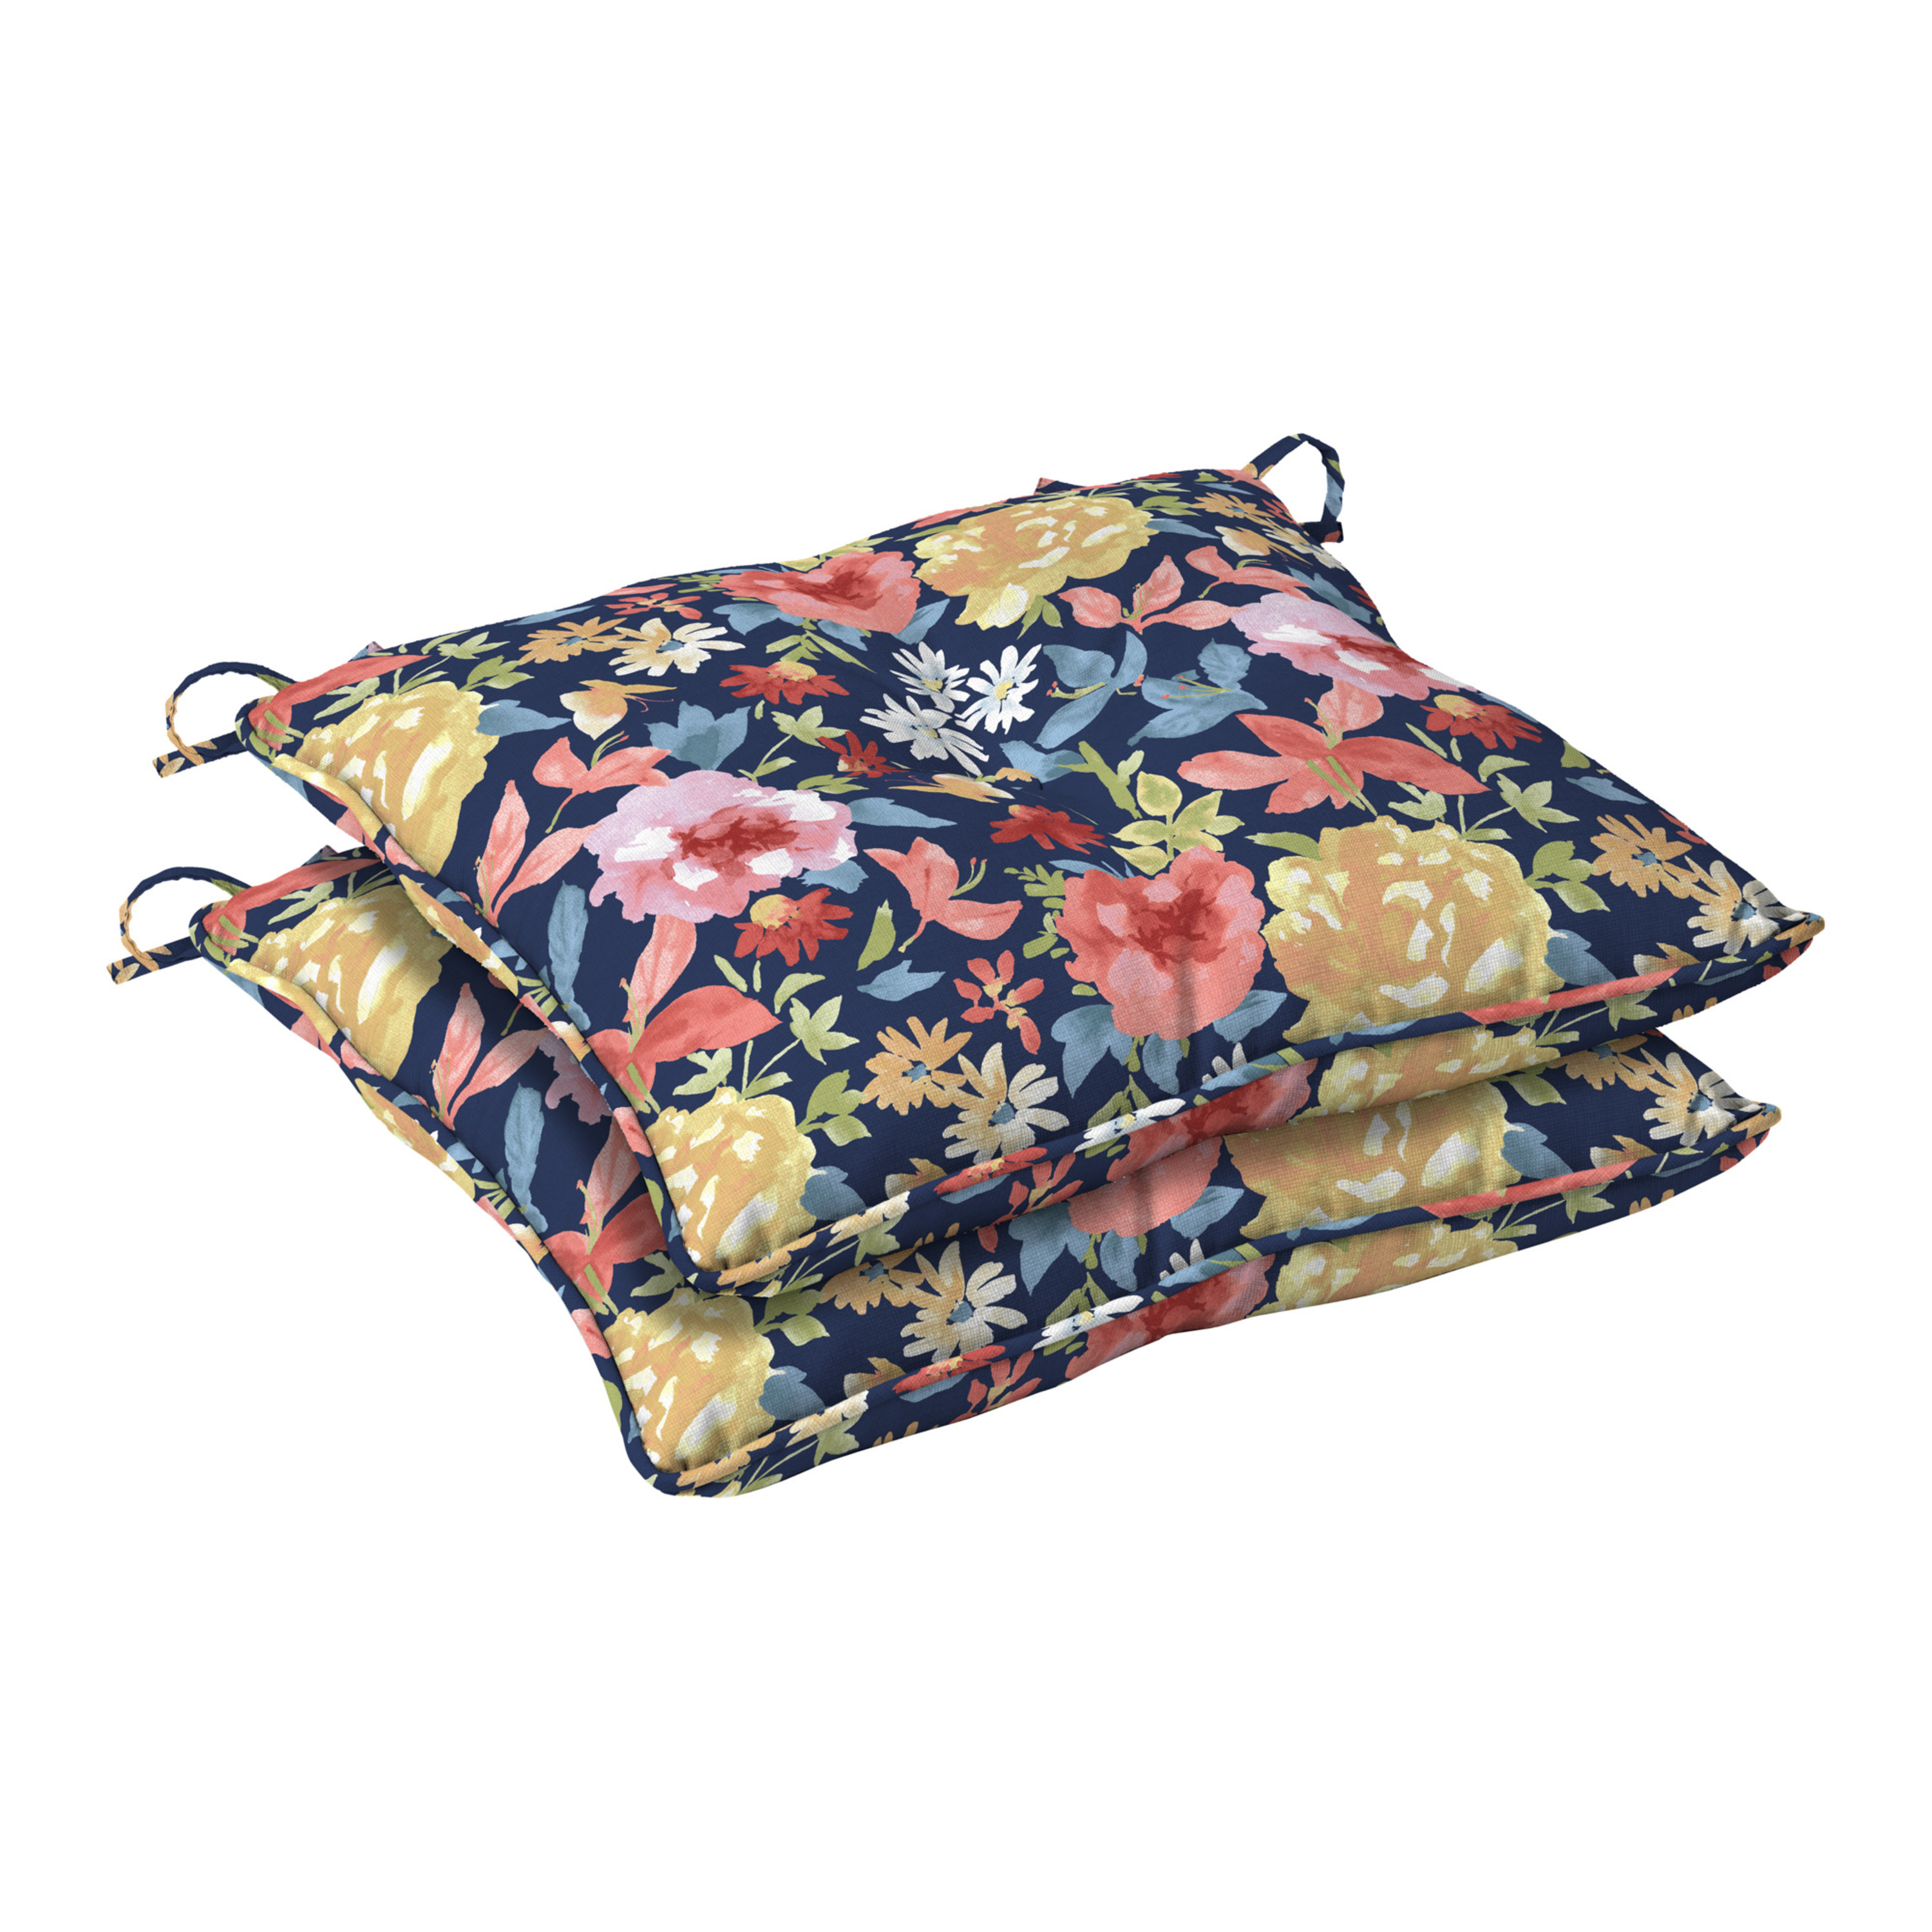 The Pioneer Woman 18" x 19" Multi-color Fiona Floral Outdoor Seat Pad, 2 Pack - image 1 of 10